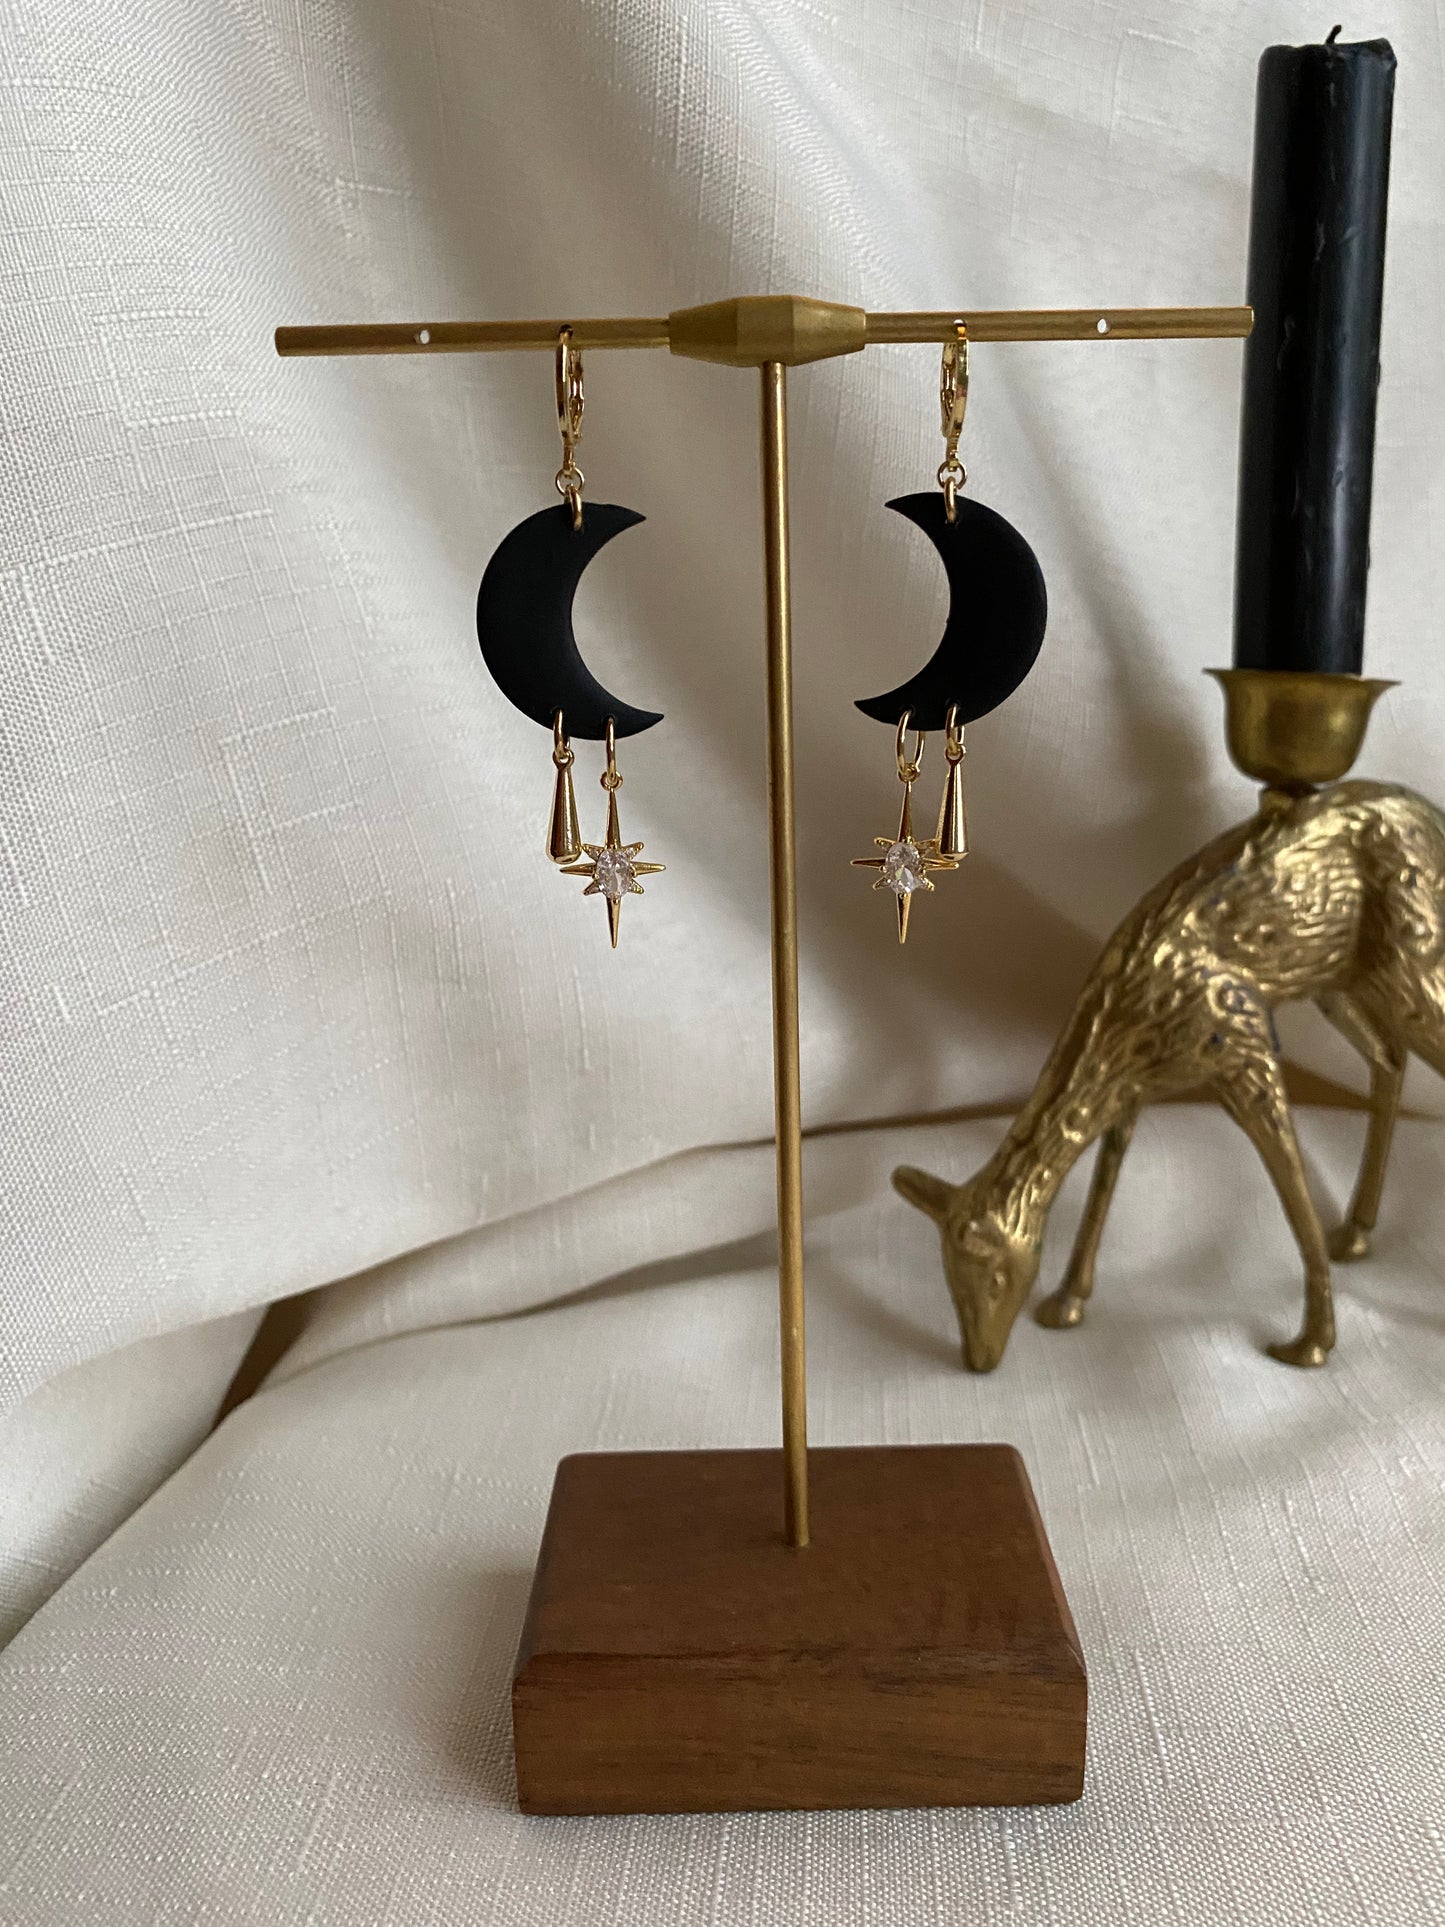 The Witching Hour Clay Moon Earrings